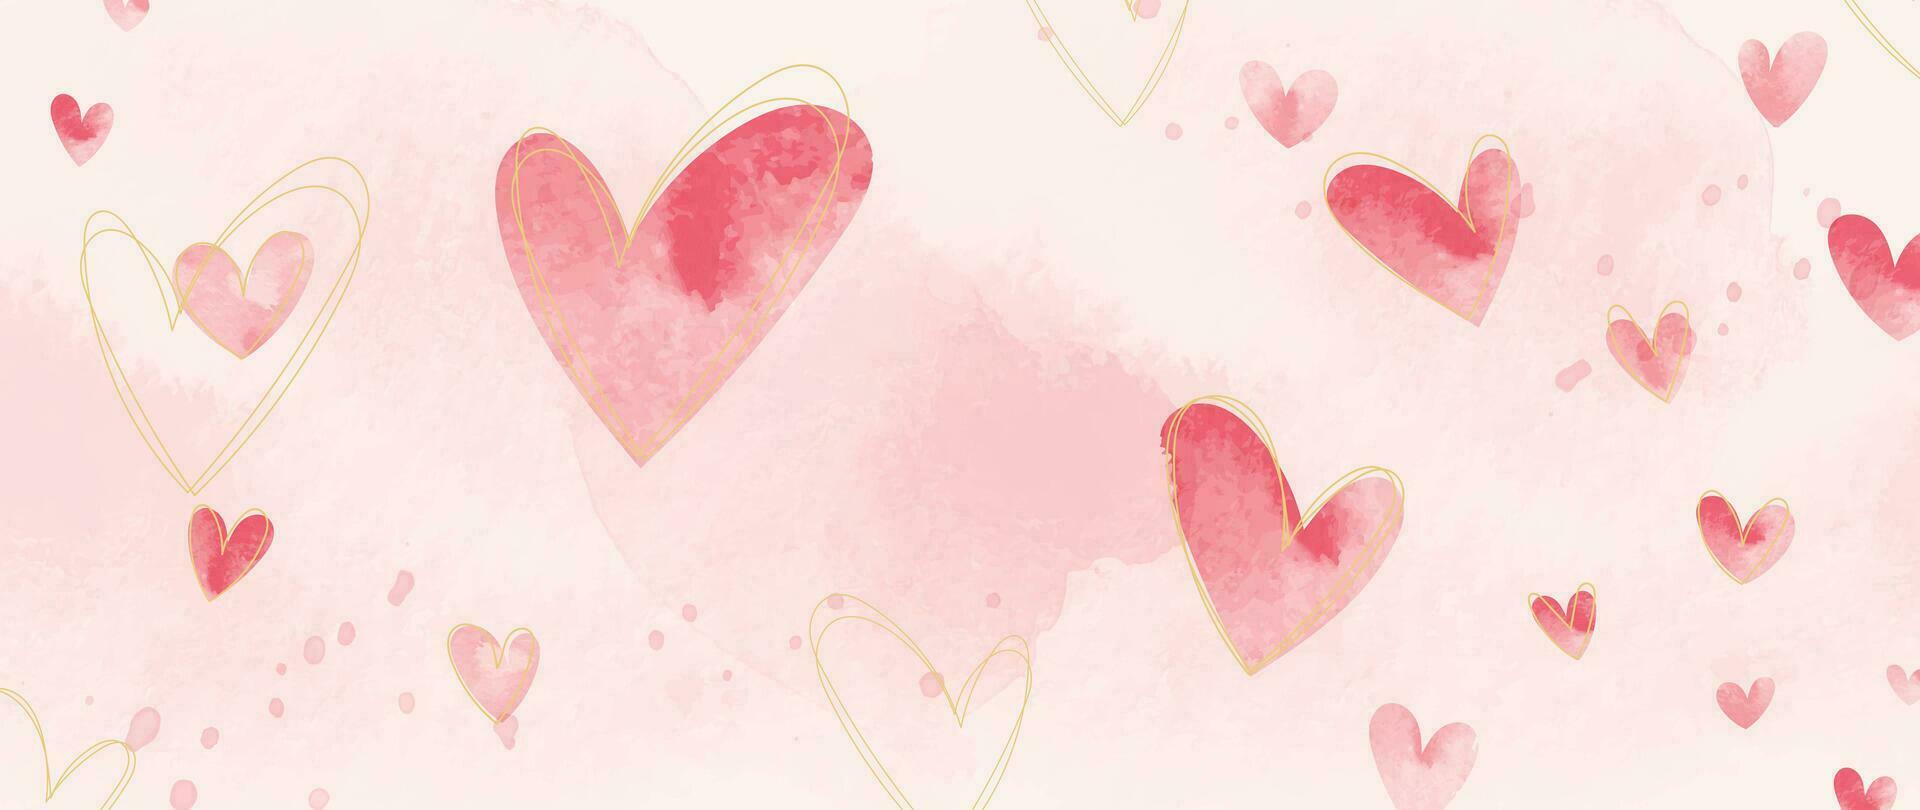 Happy Valentines day pink background vector. Romantic symbol drawing of pink doodle hearts watercolor texture, gold line. Love illustration for greeting card, web banner, fabric, package, cover. vector